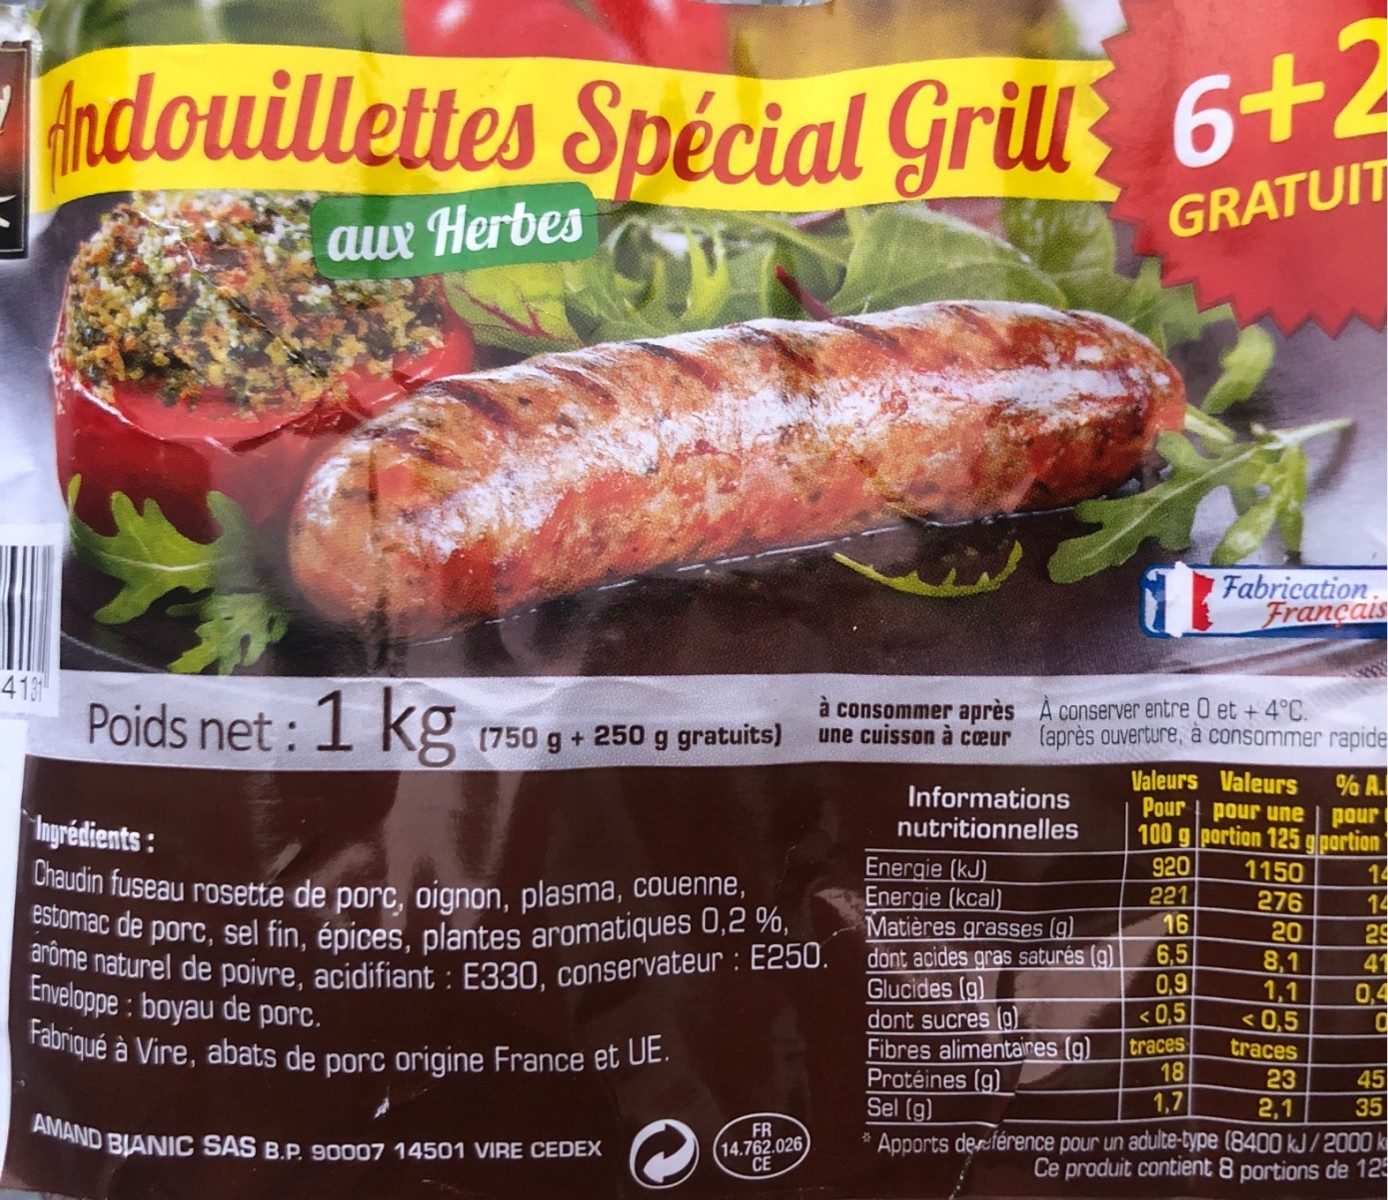 Andouillettes special grill - Product - fr